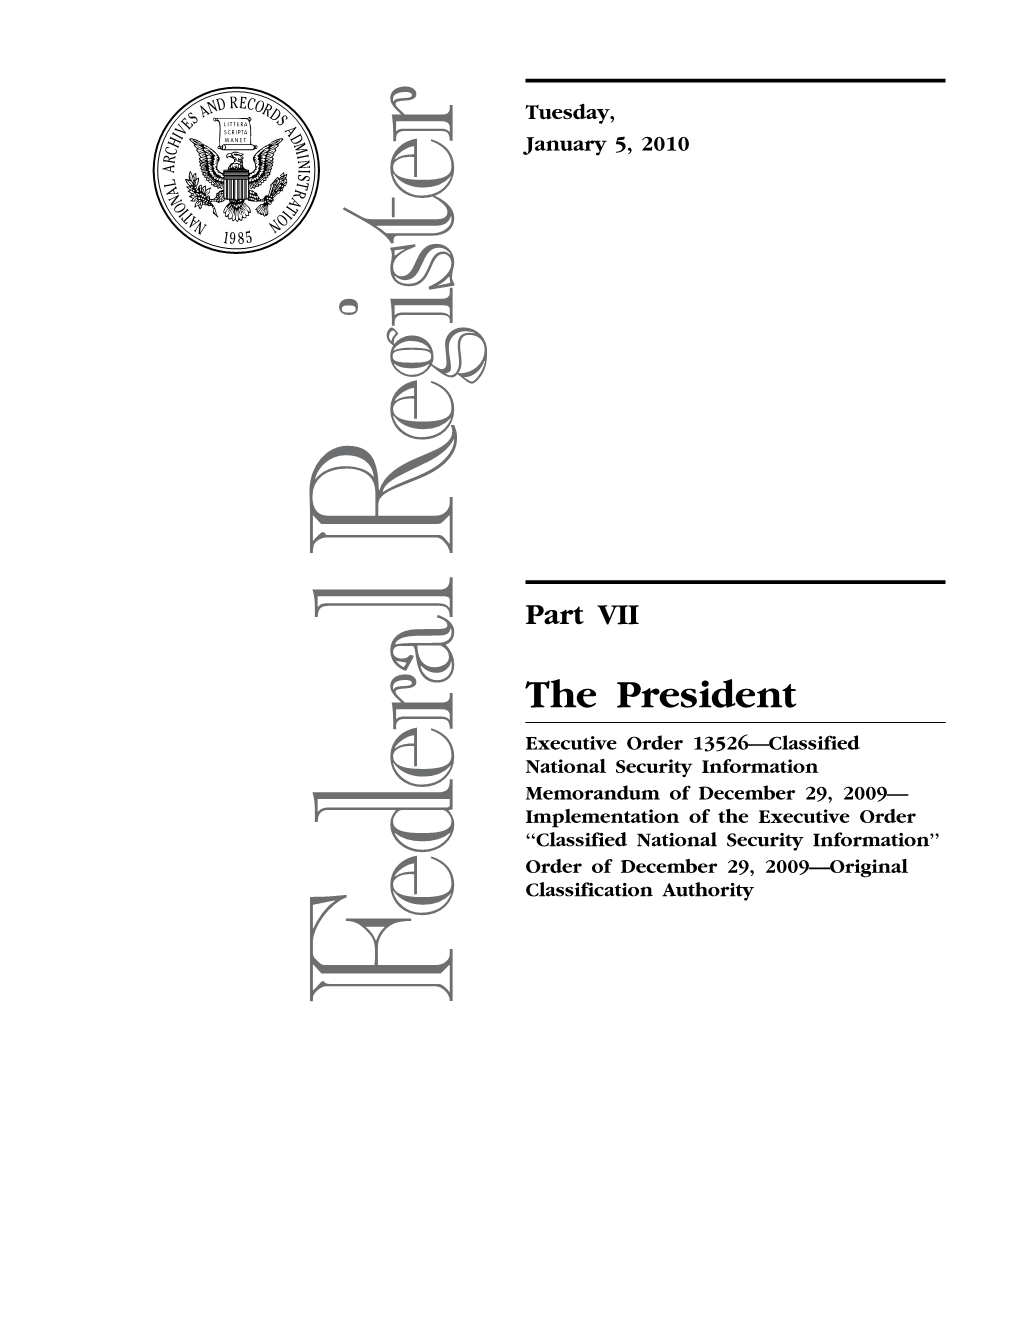 Executive Order the President Signed on December 29, 2009